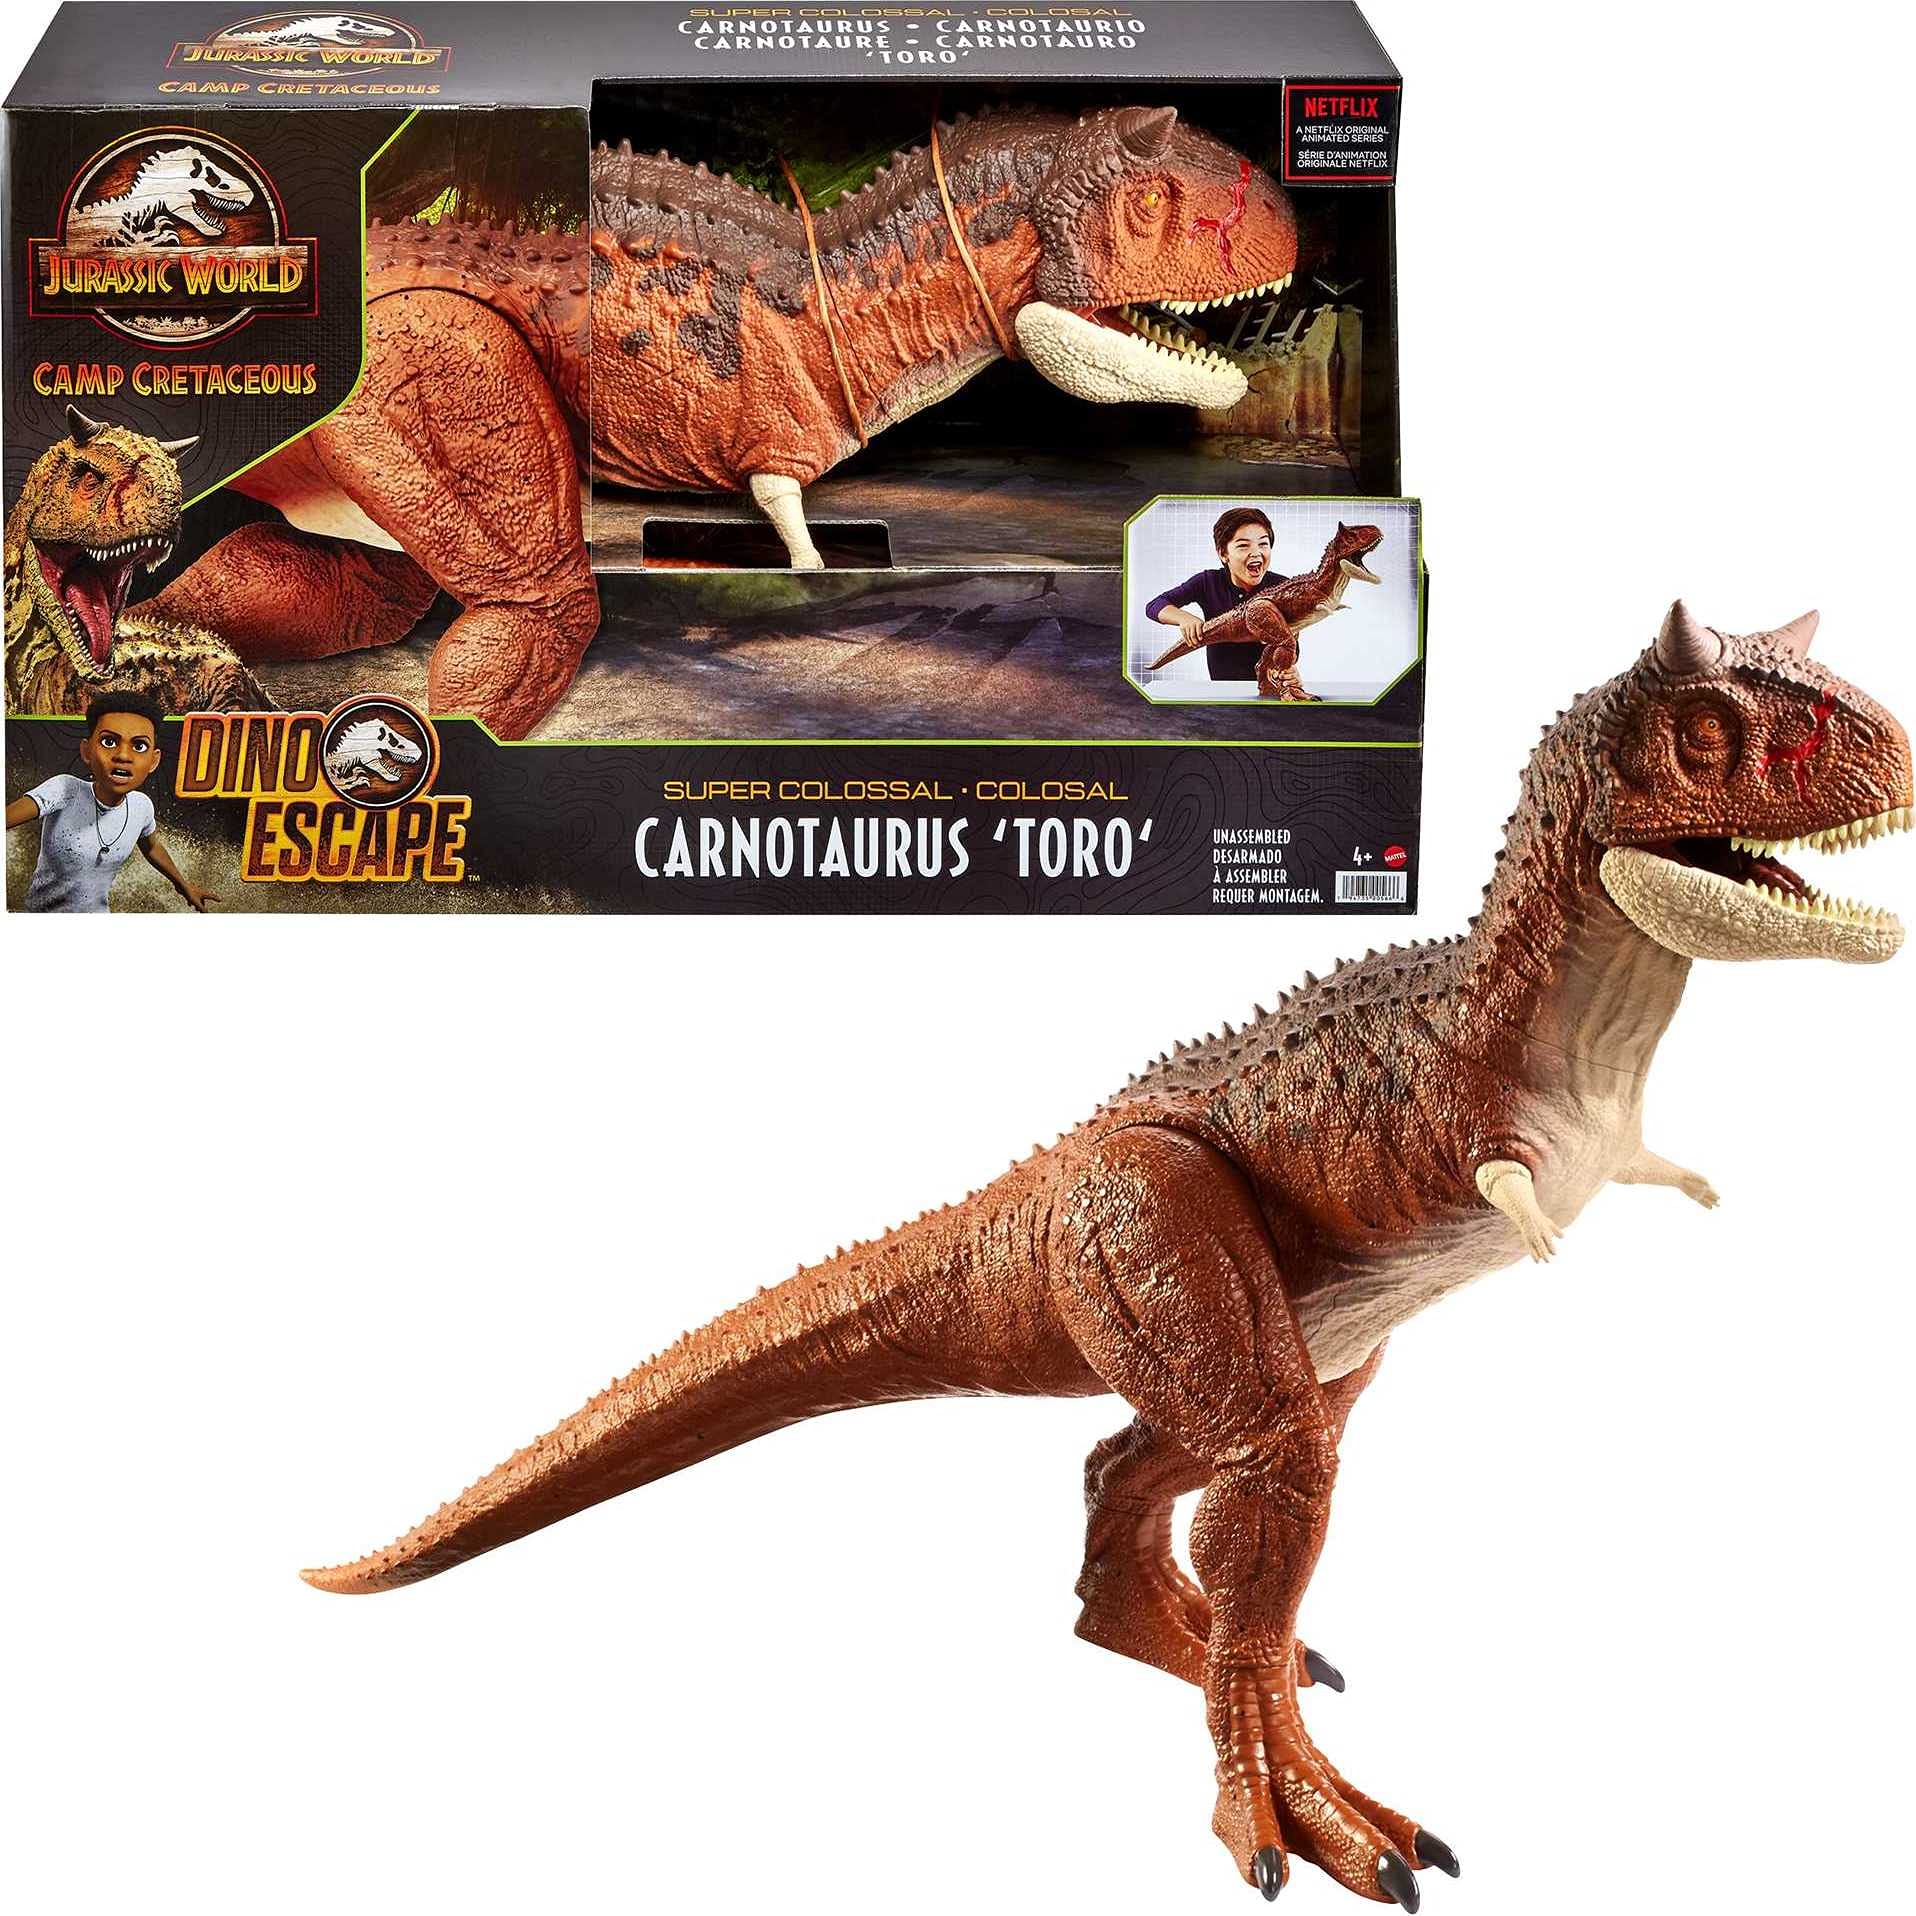 Jurassic World Toys Jurassic World Colossal Carnotaurus Toro Dinosaur Action Figure Camp Cretaceous With Stomach-Release Feature, 36-In91-Cm Long, R